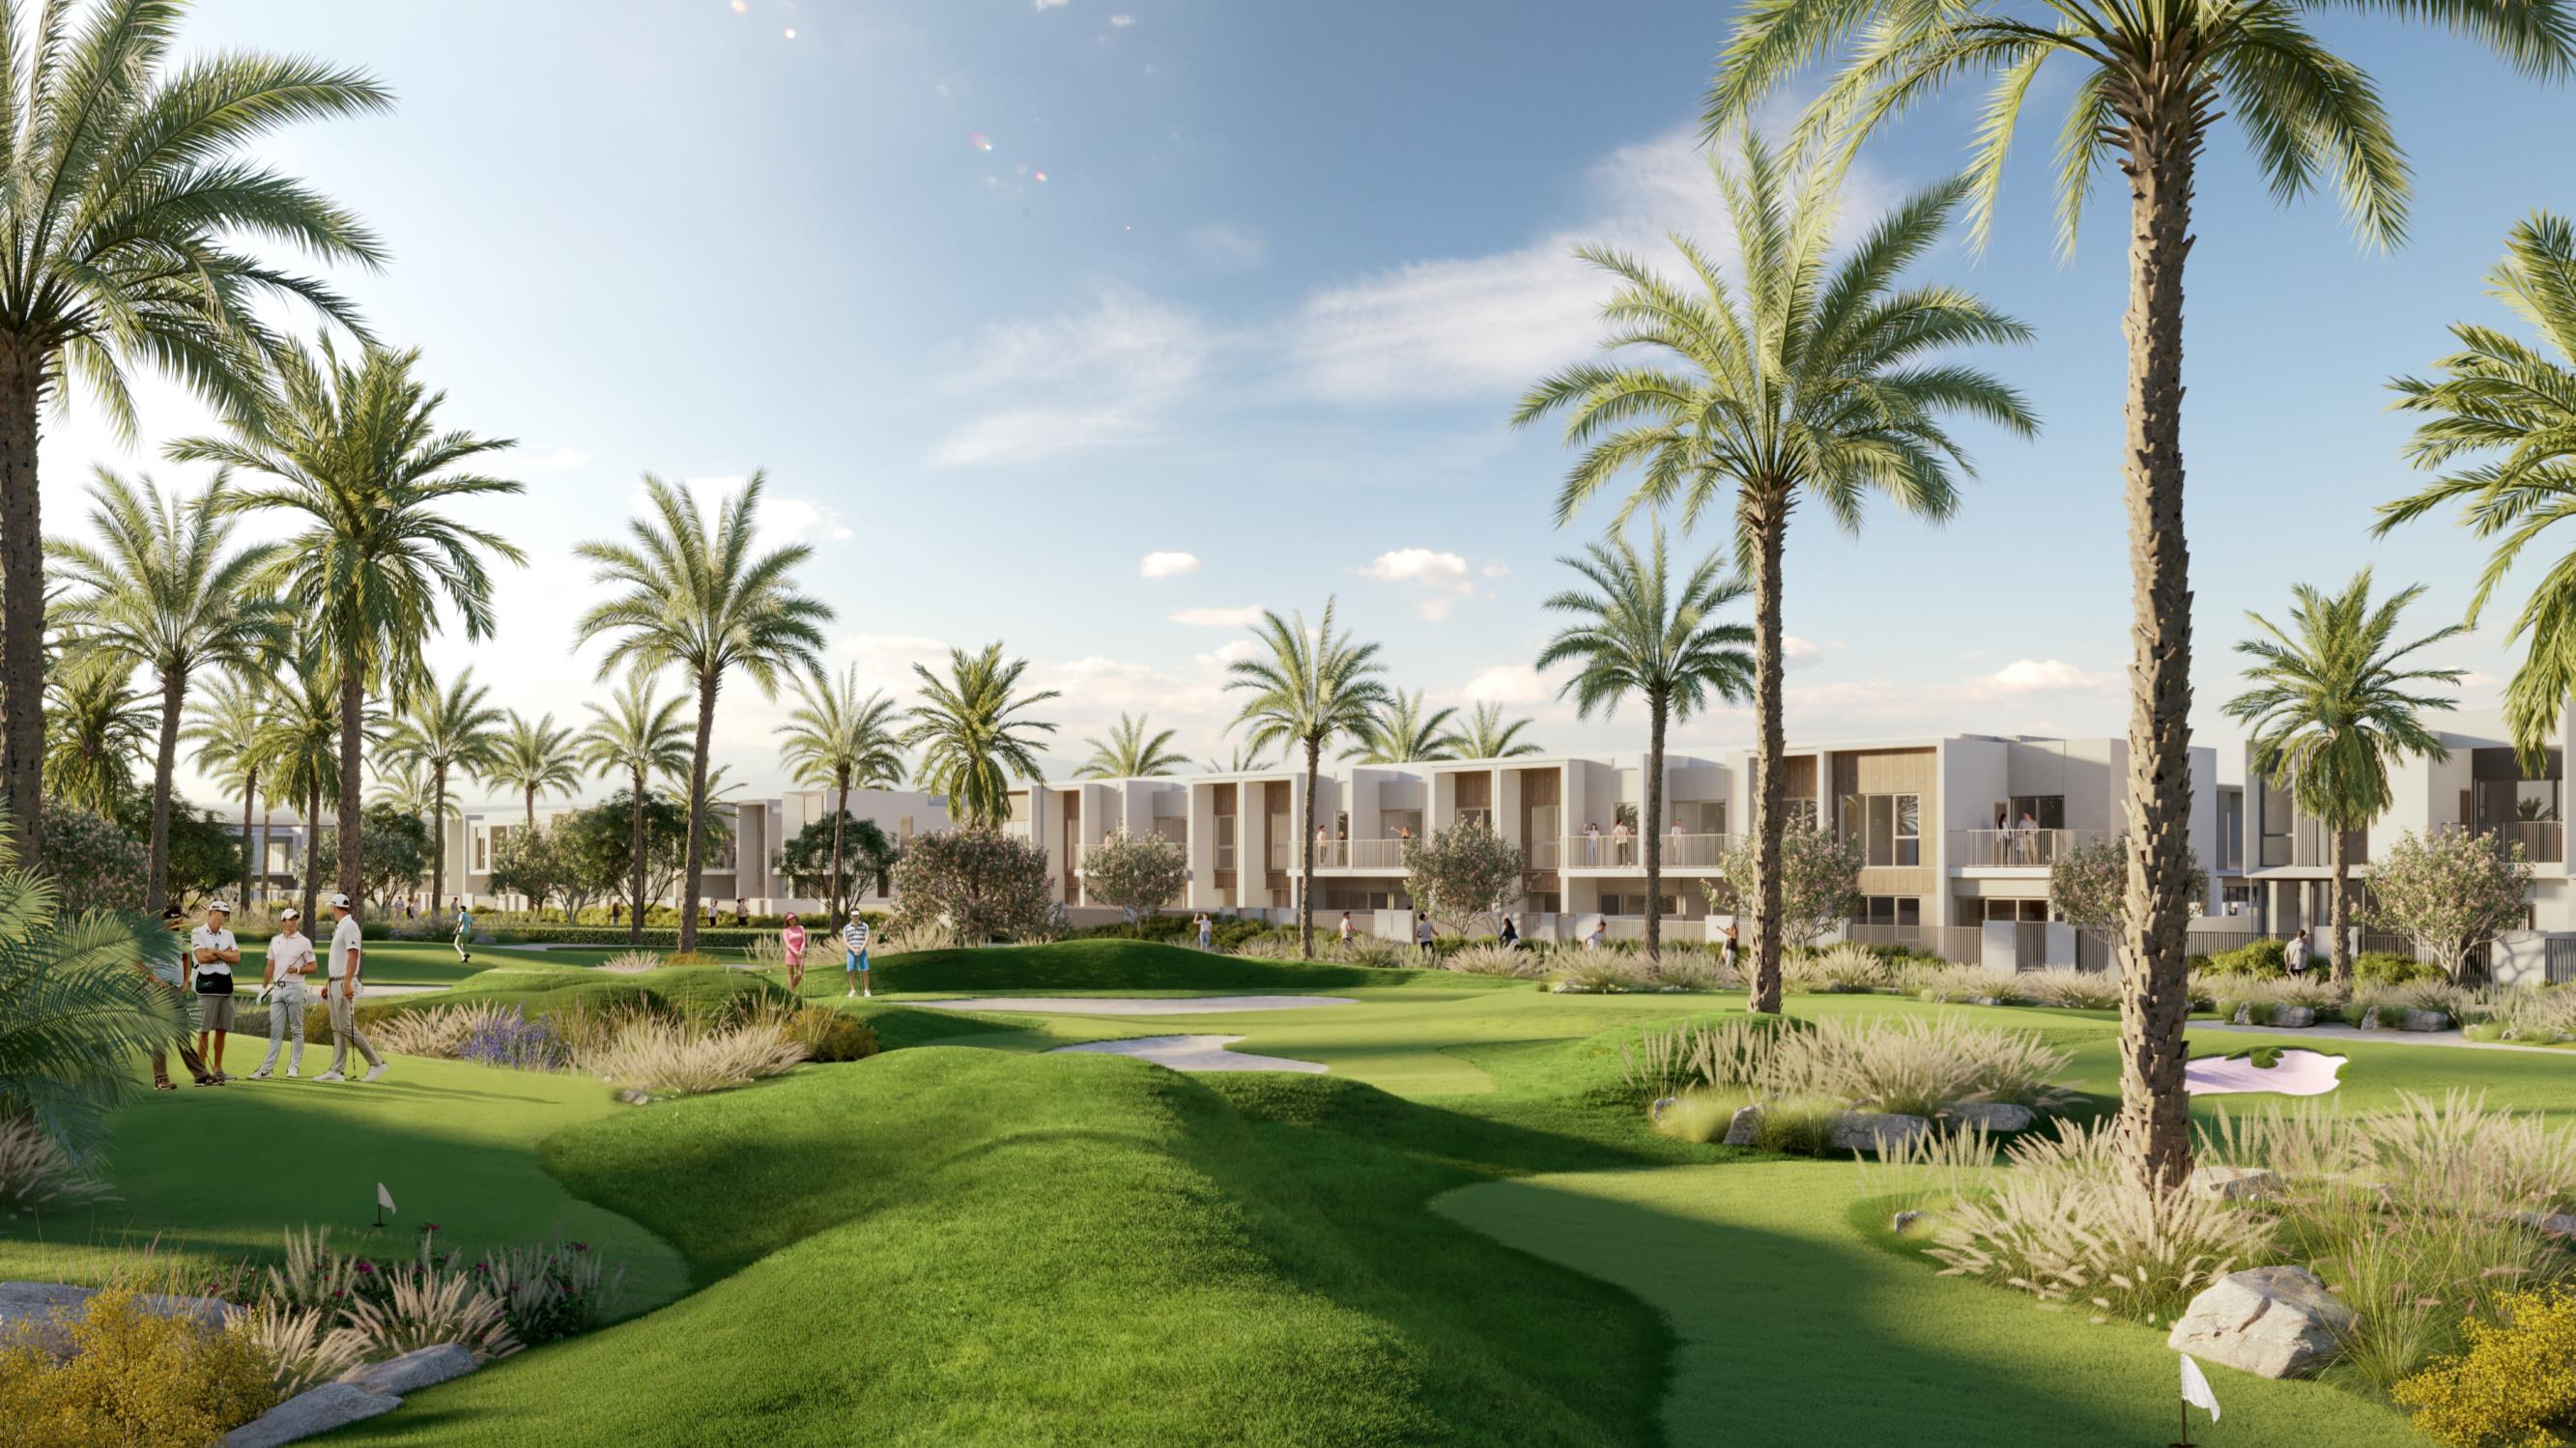 Properties for Sale in Central Park at City Walk within close proximity to Downtown Dubai – Buy Real Estate from Meraas